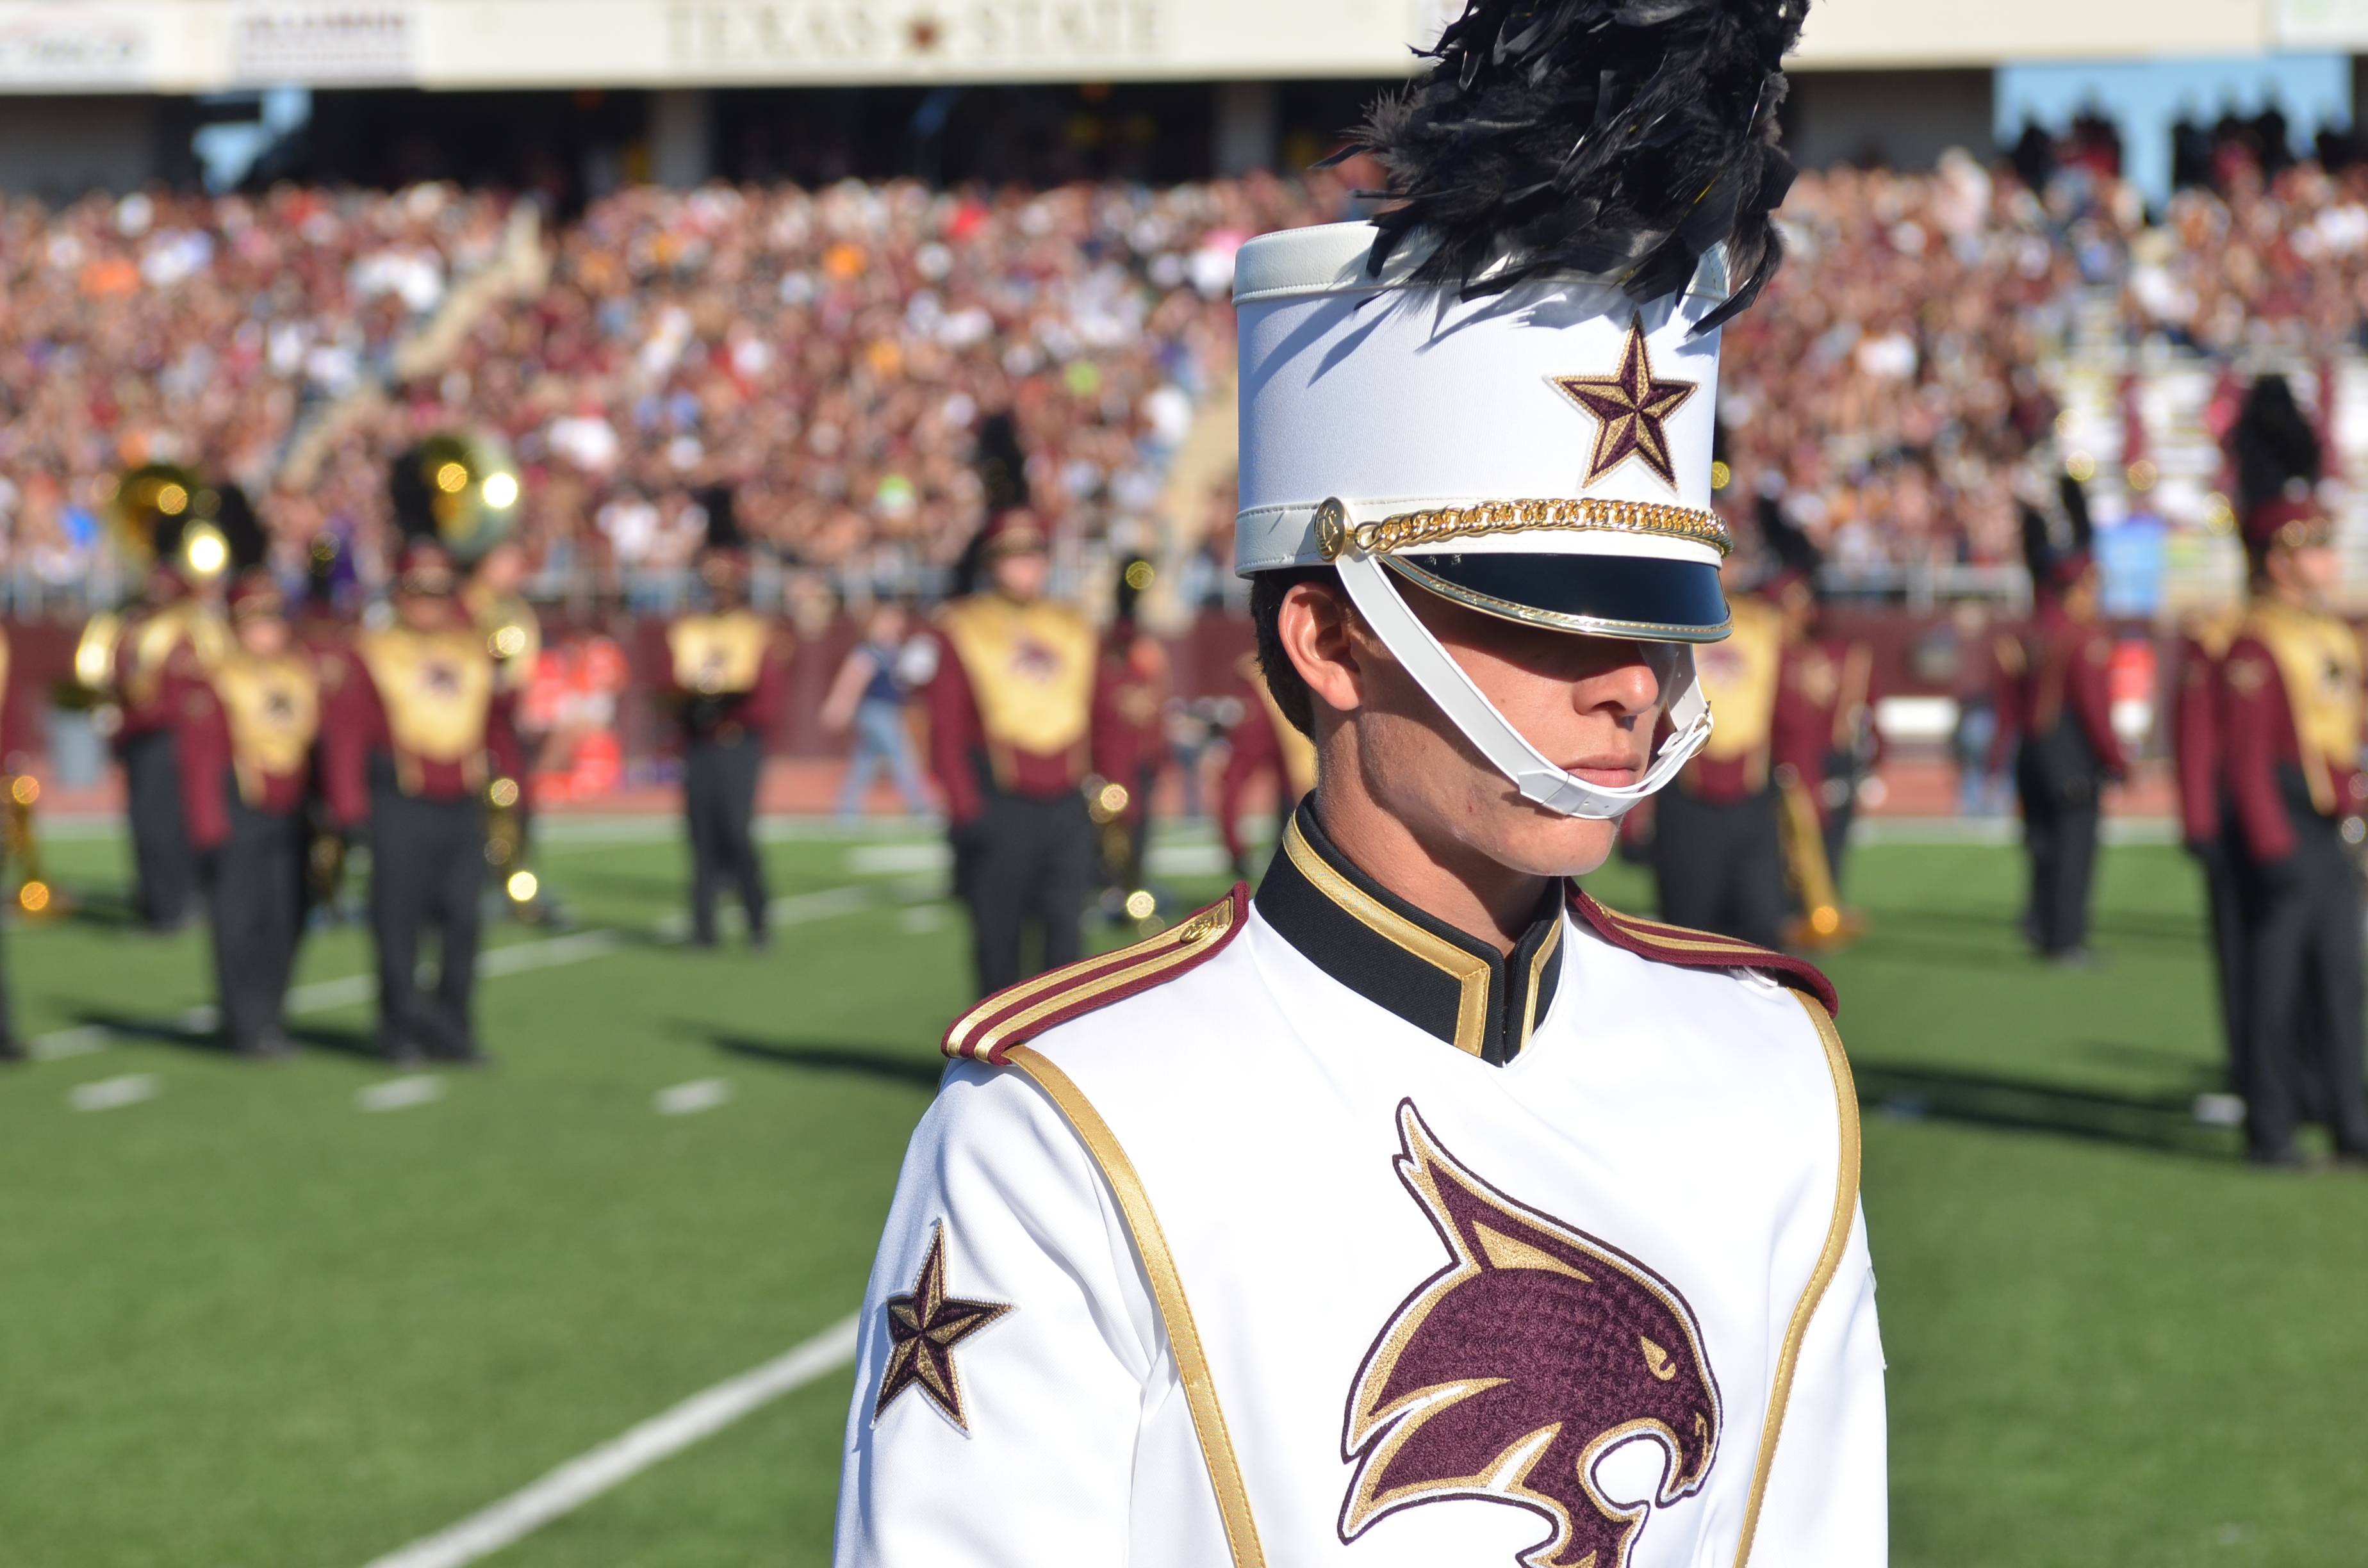 Image of a trumpet player on the field performing